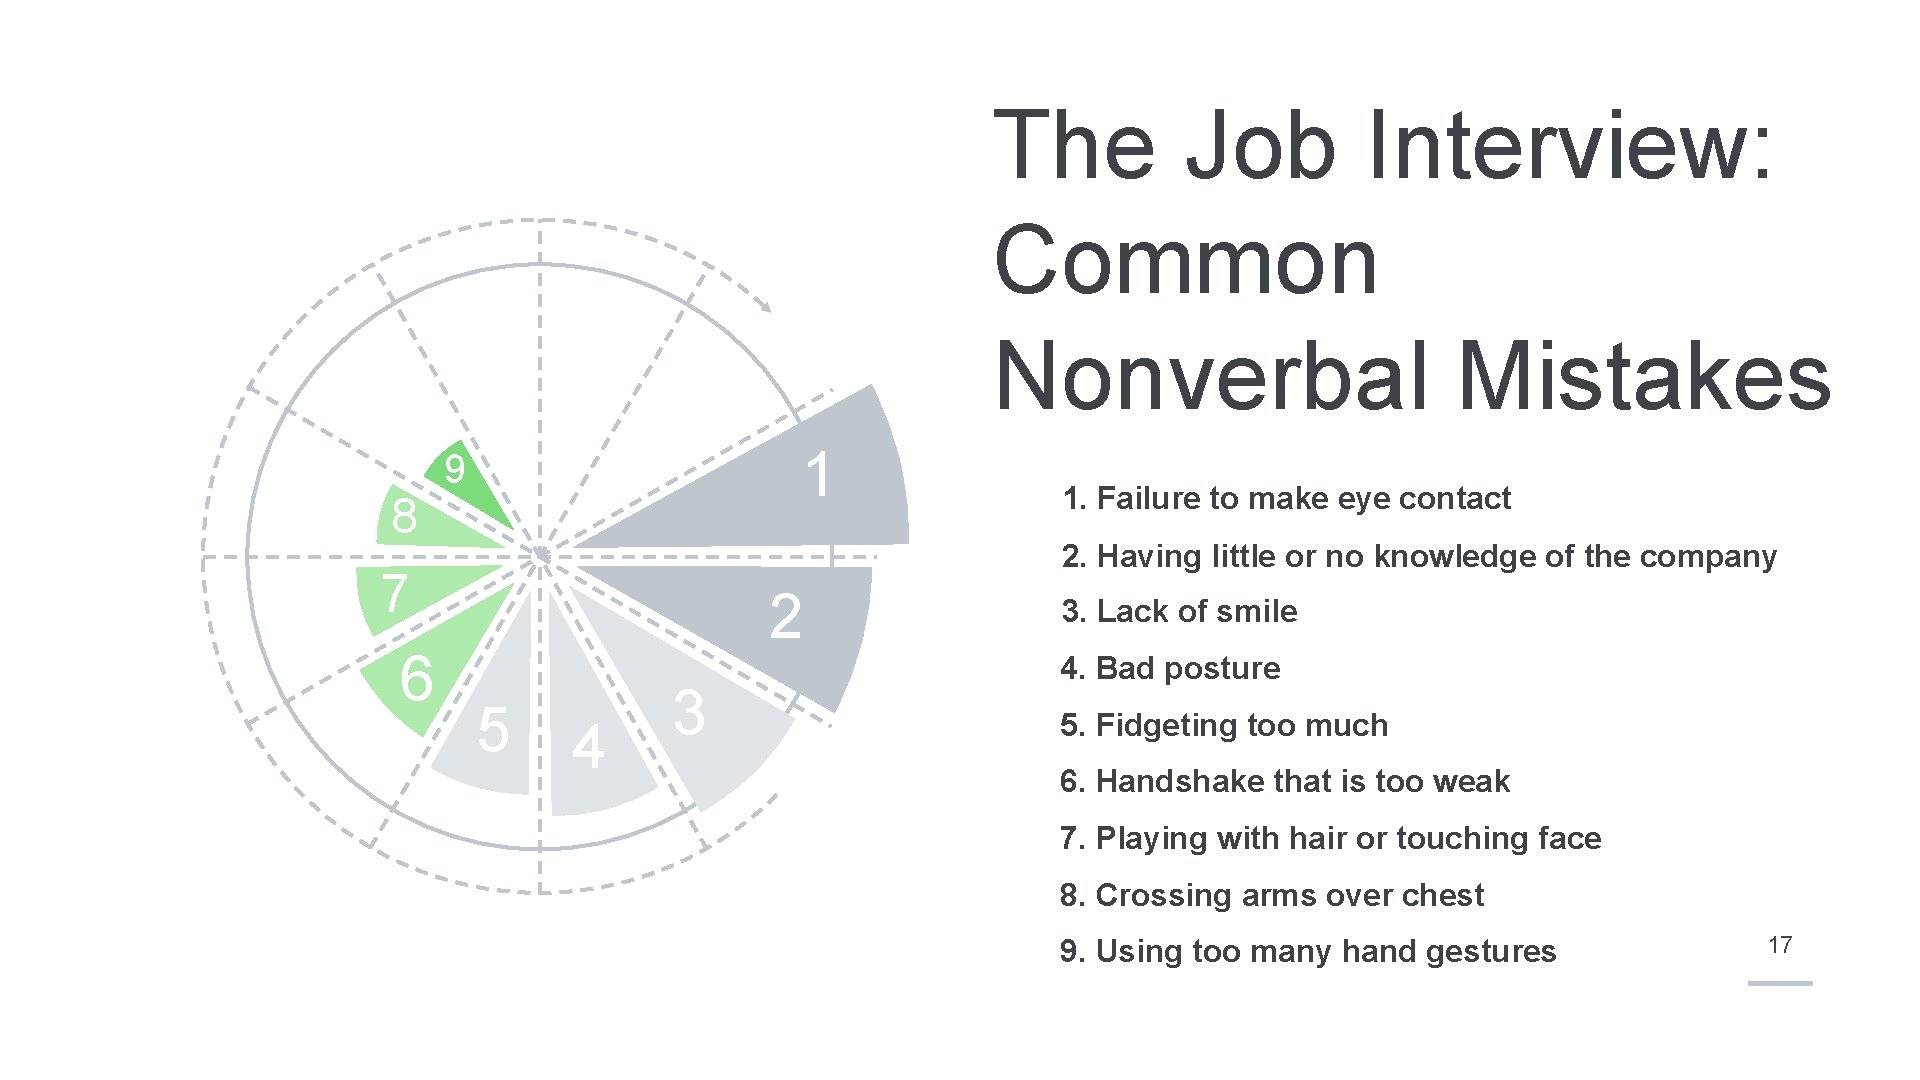 The Job Interview: Common Nonverbal Mistakes 8 1 9 2. Having little or no